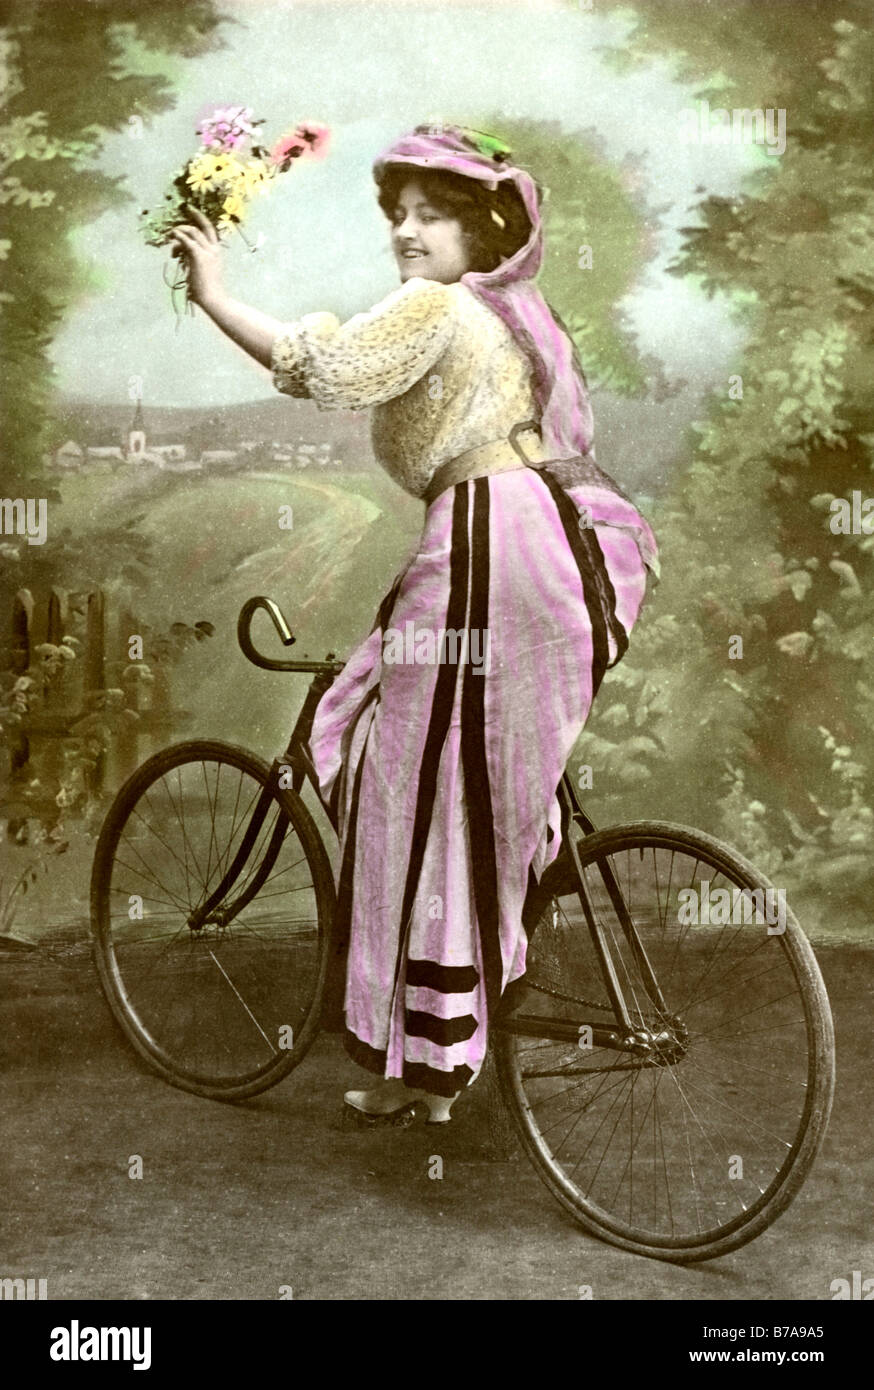 Historical photo, woman on bicycle, ca. 1910 Stock Photo